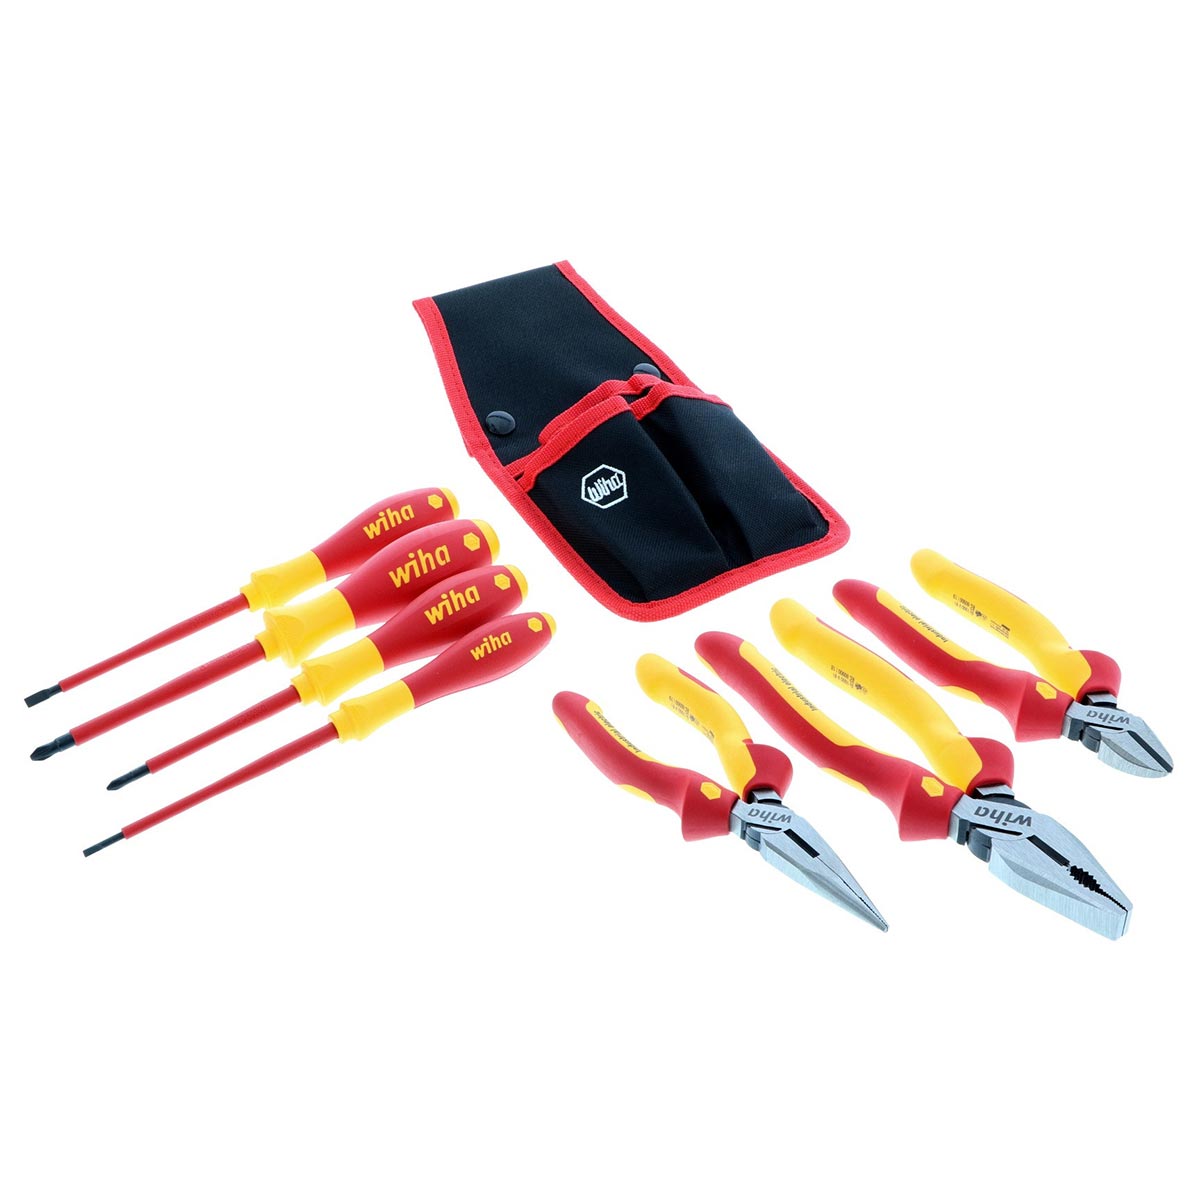 Wiha 32985 Insulated Industrial Pliers and Screwdriver Set - 7 Piece Set